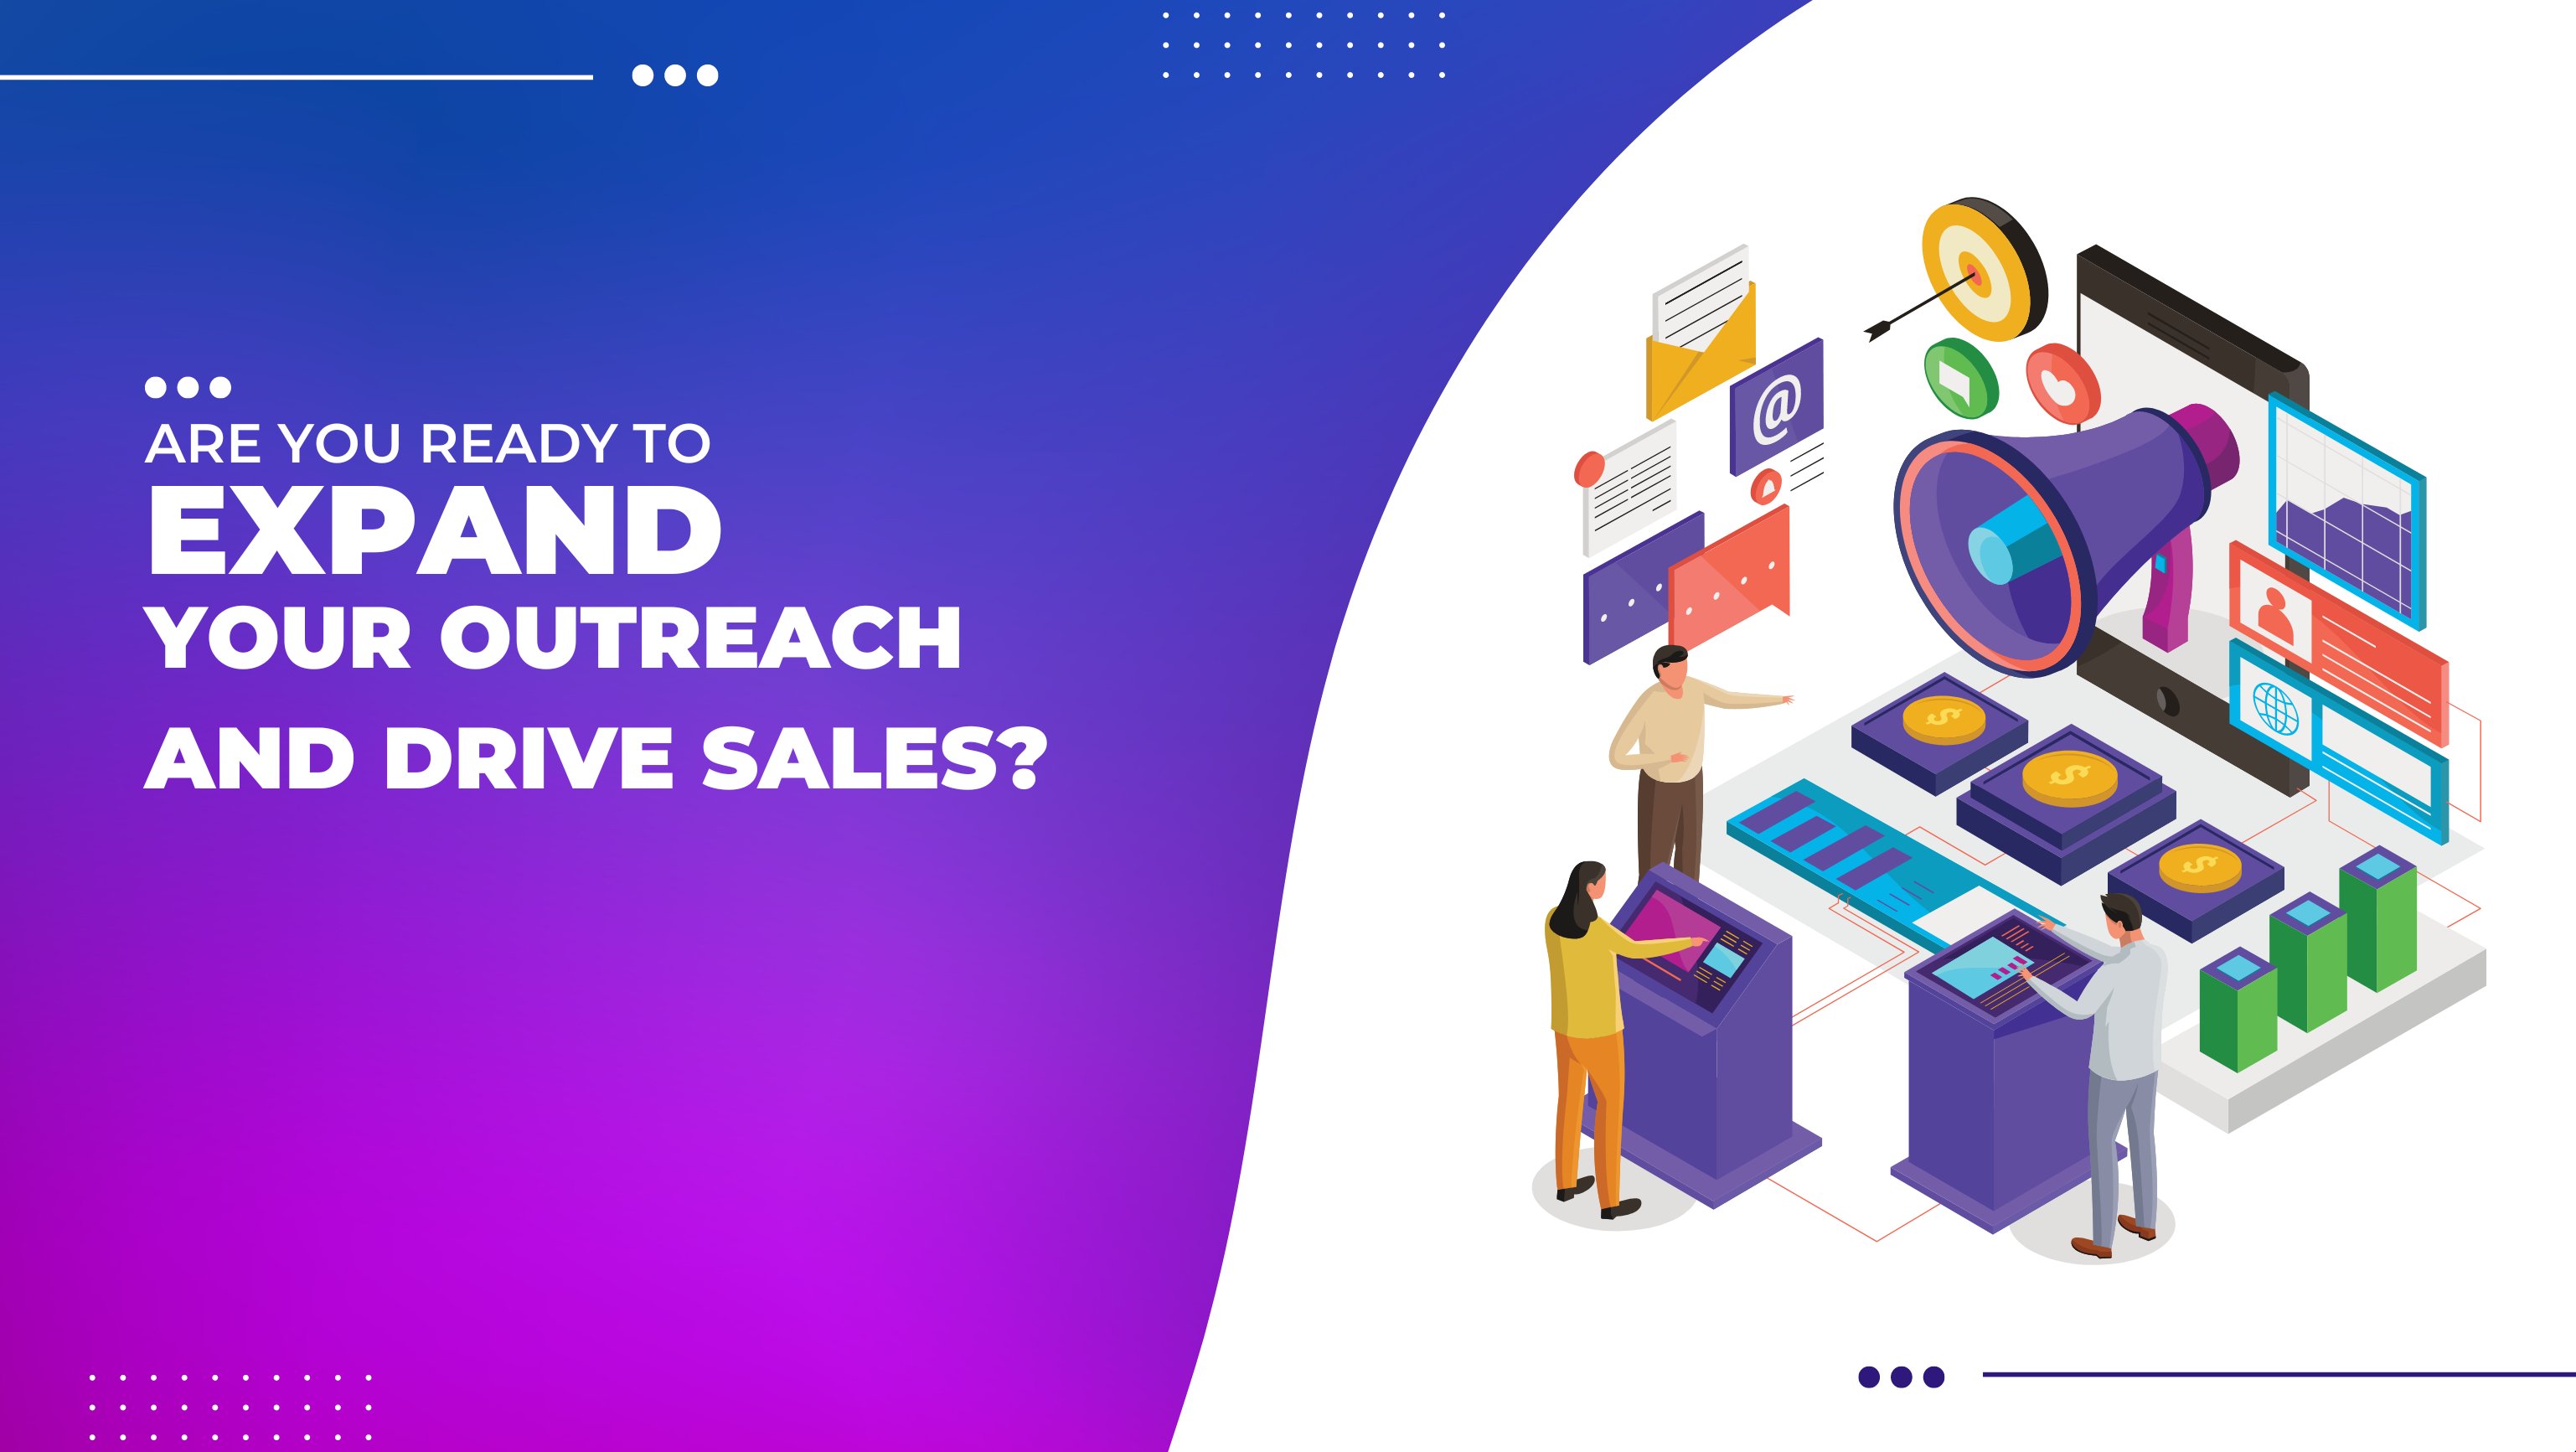 Drive sales and Expand your outreach